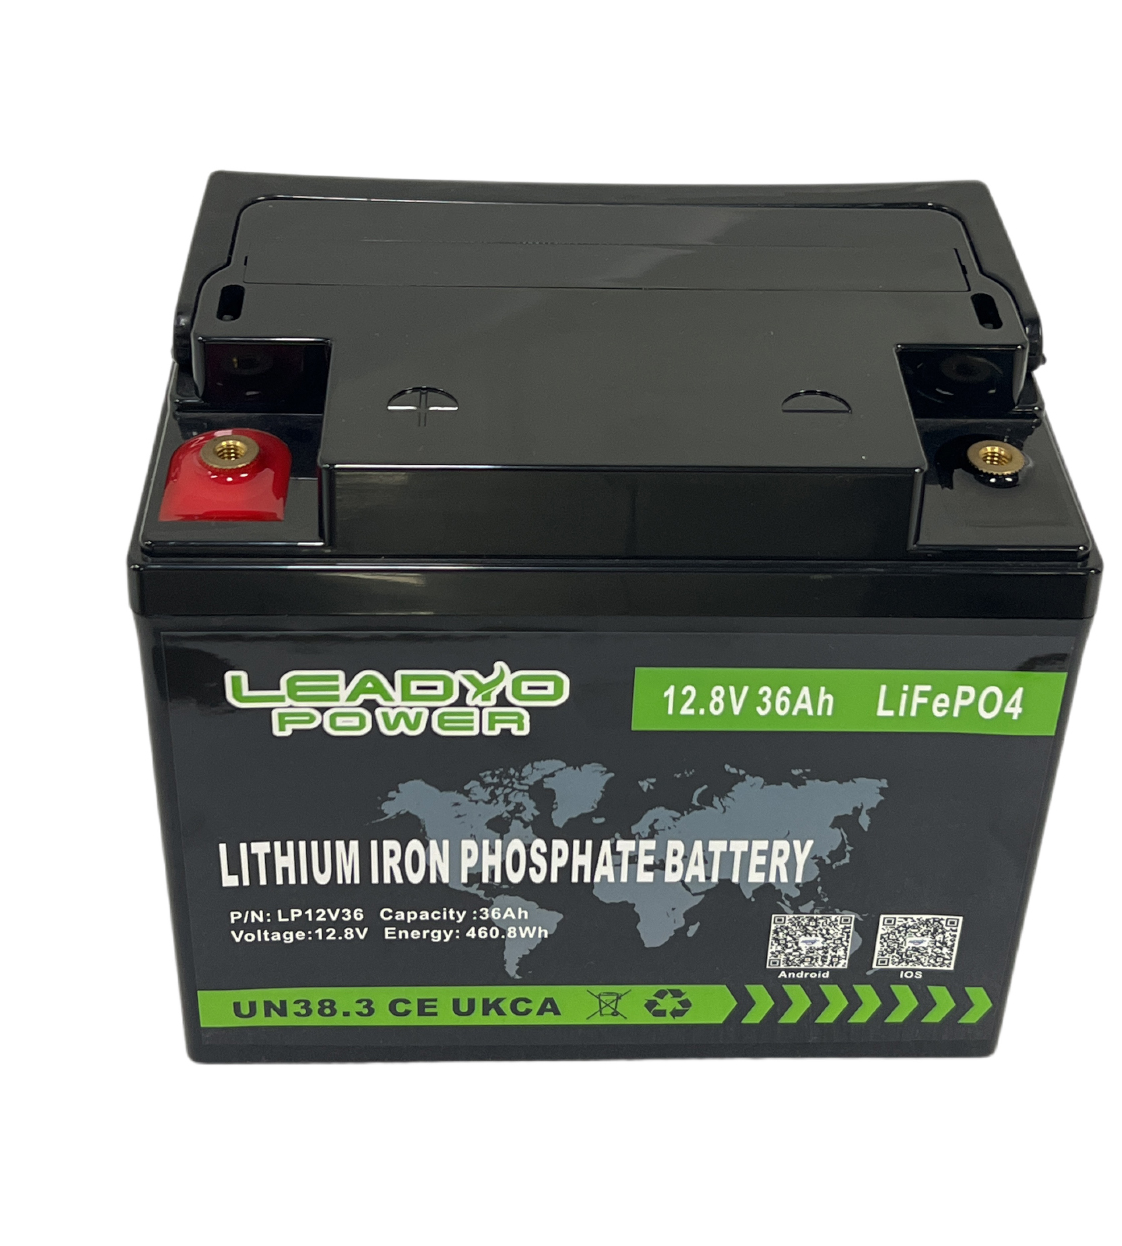 Explore Reliable Energy Solutions with Leadyo's LiFePO4 Batteries